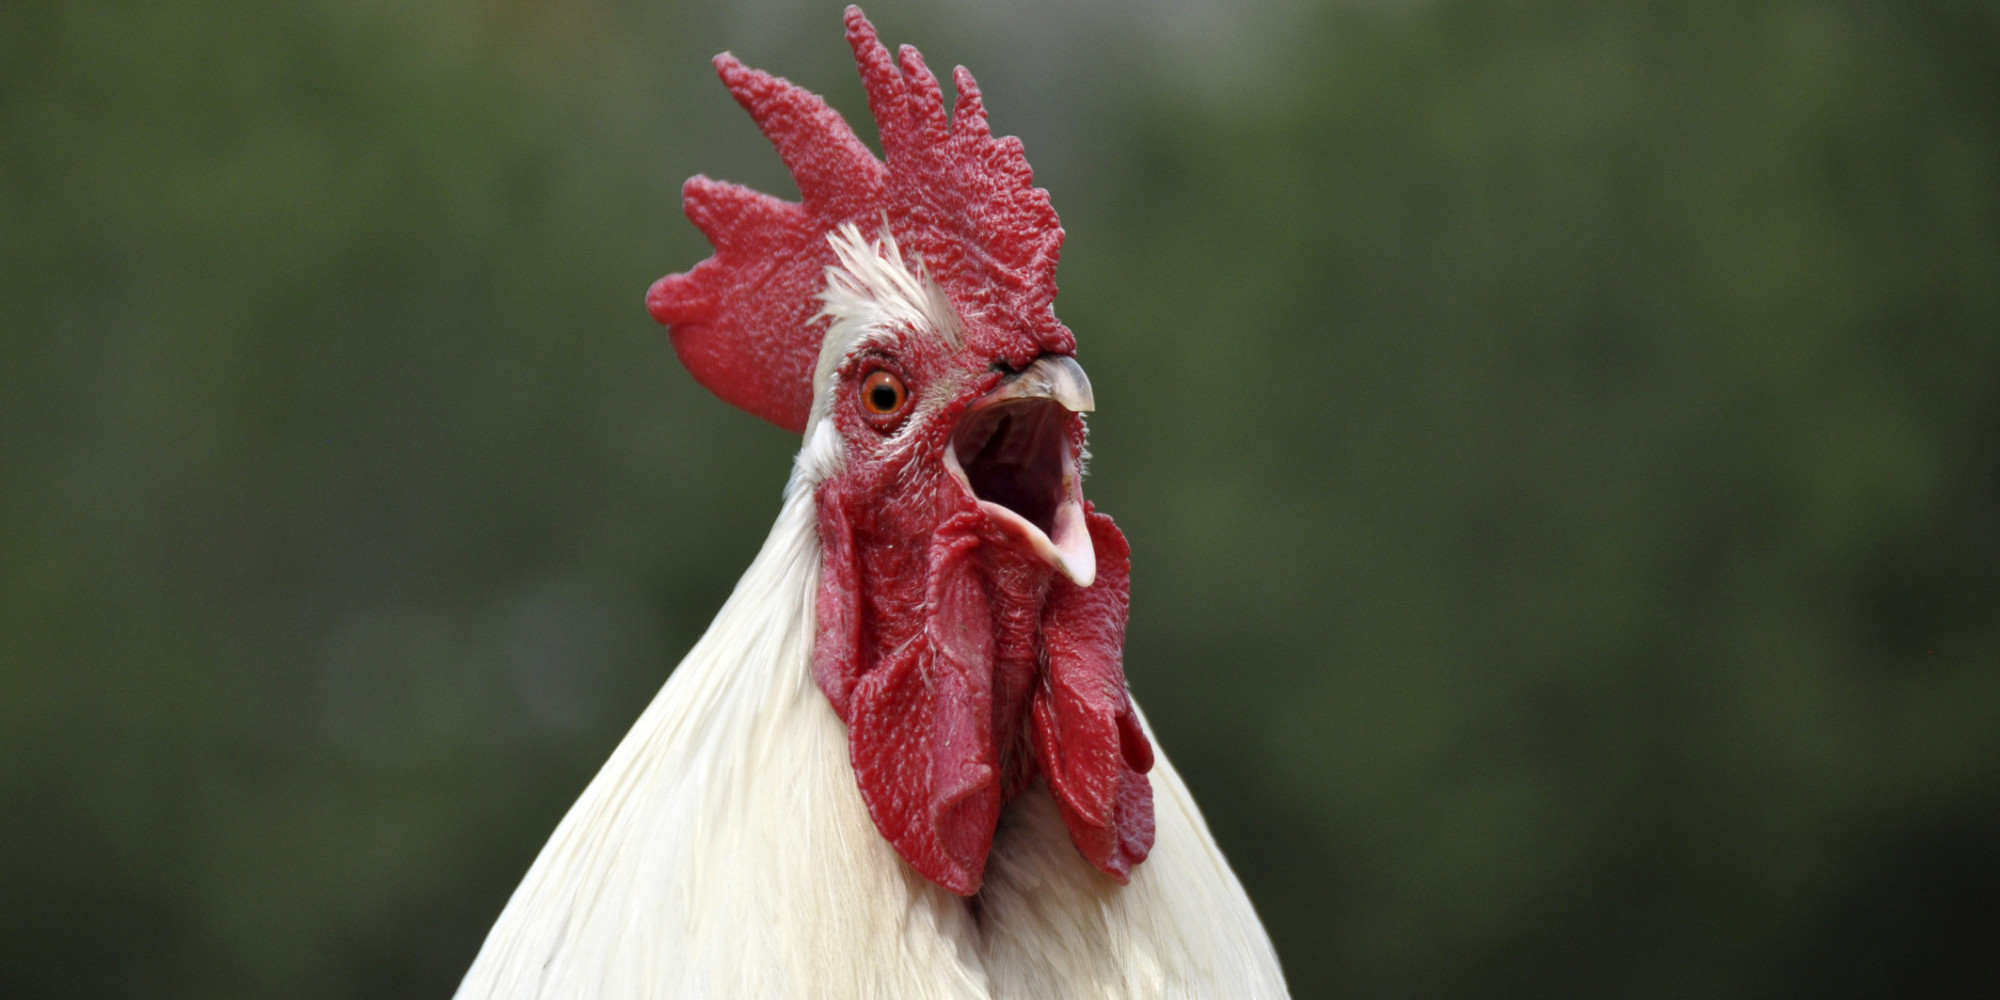 Loud Rooster Might Cost Owners $3,000 In Fines